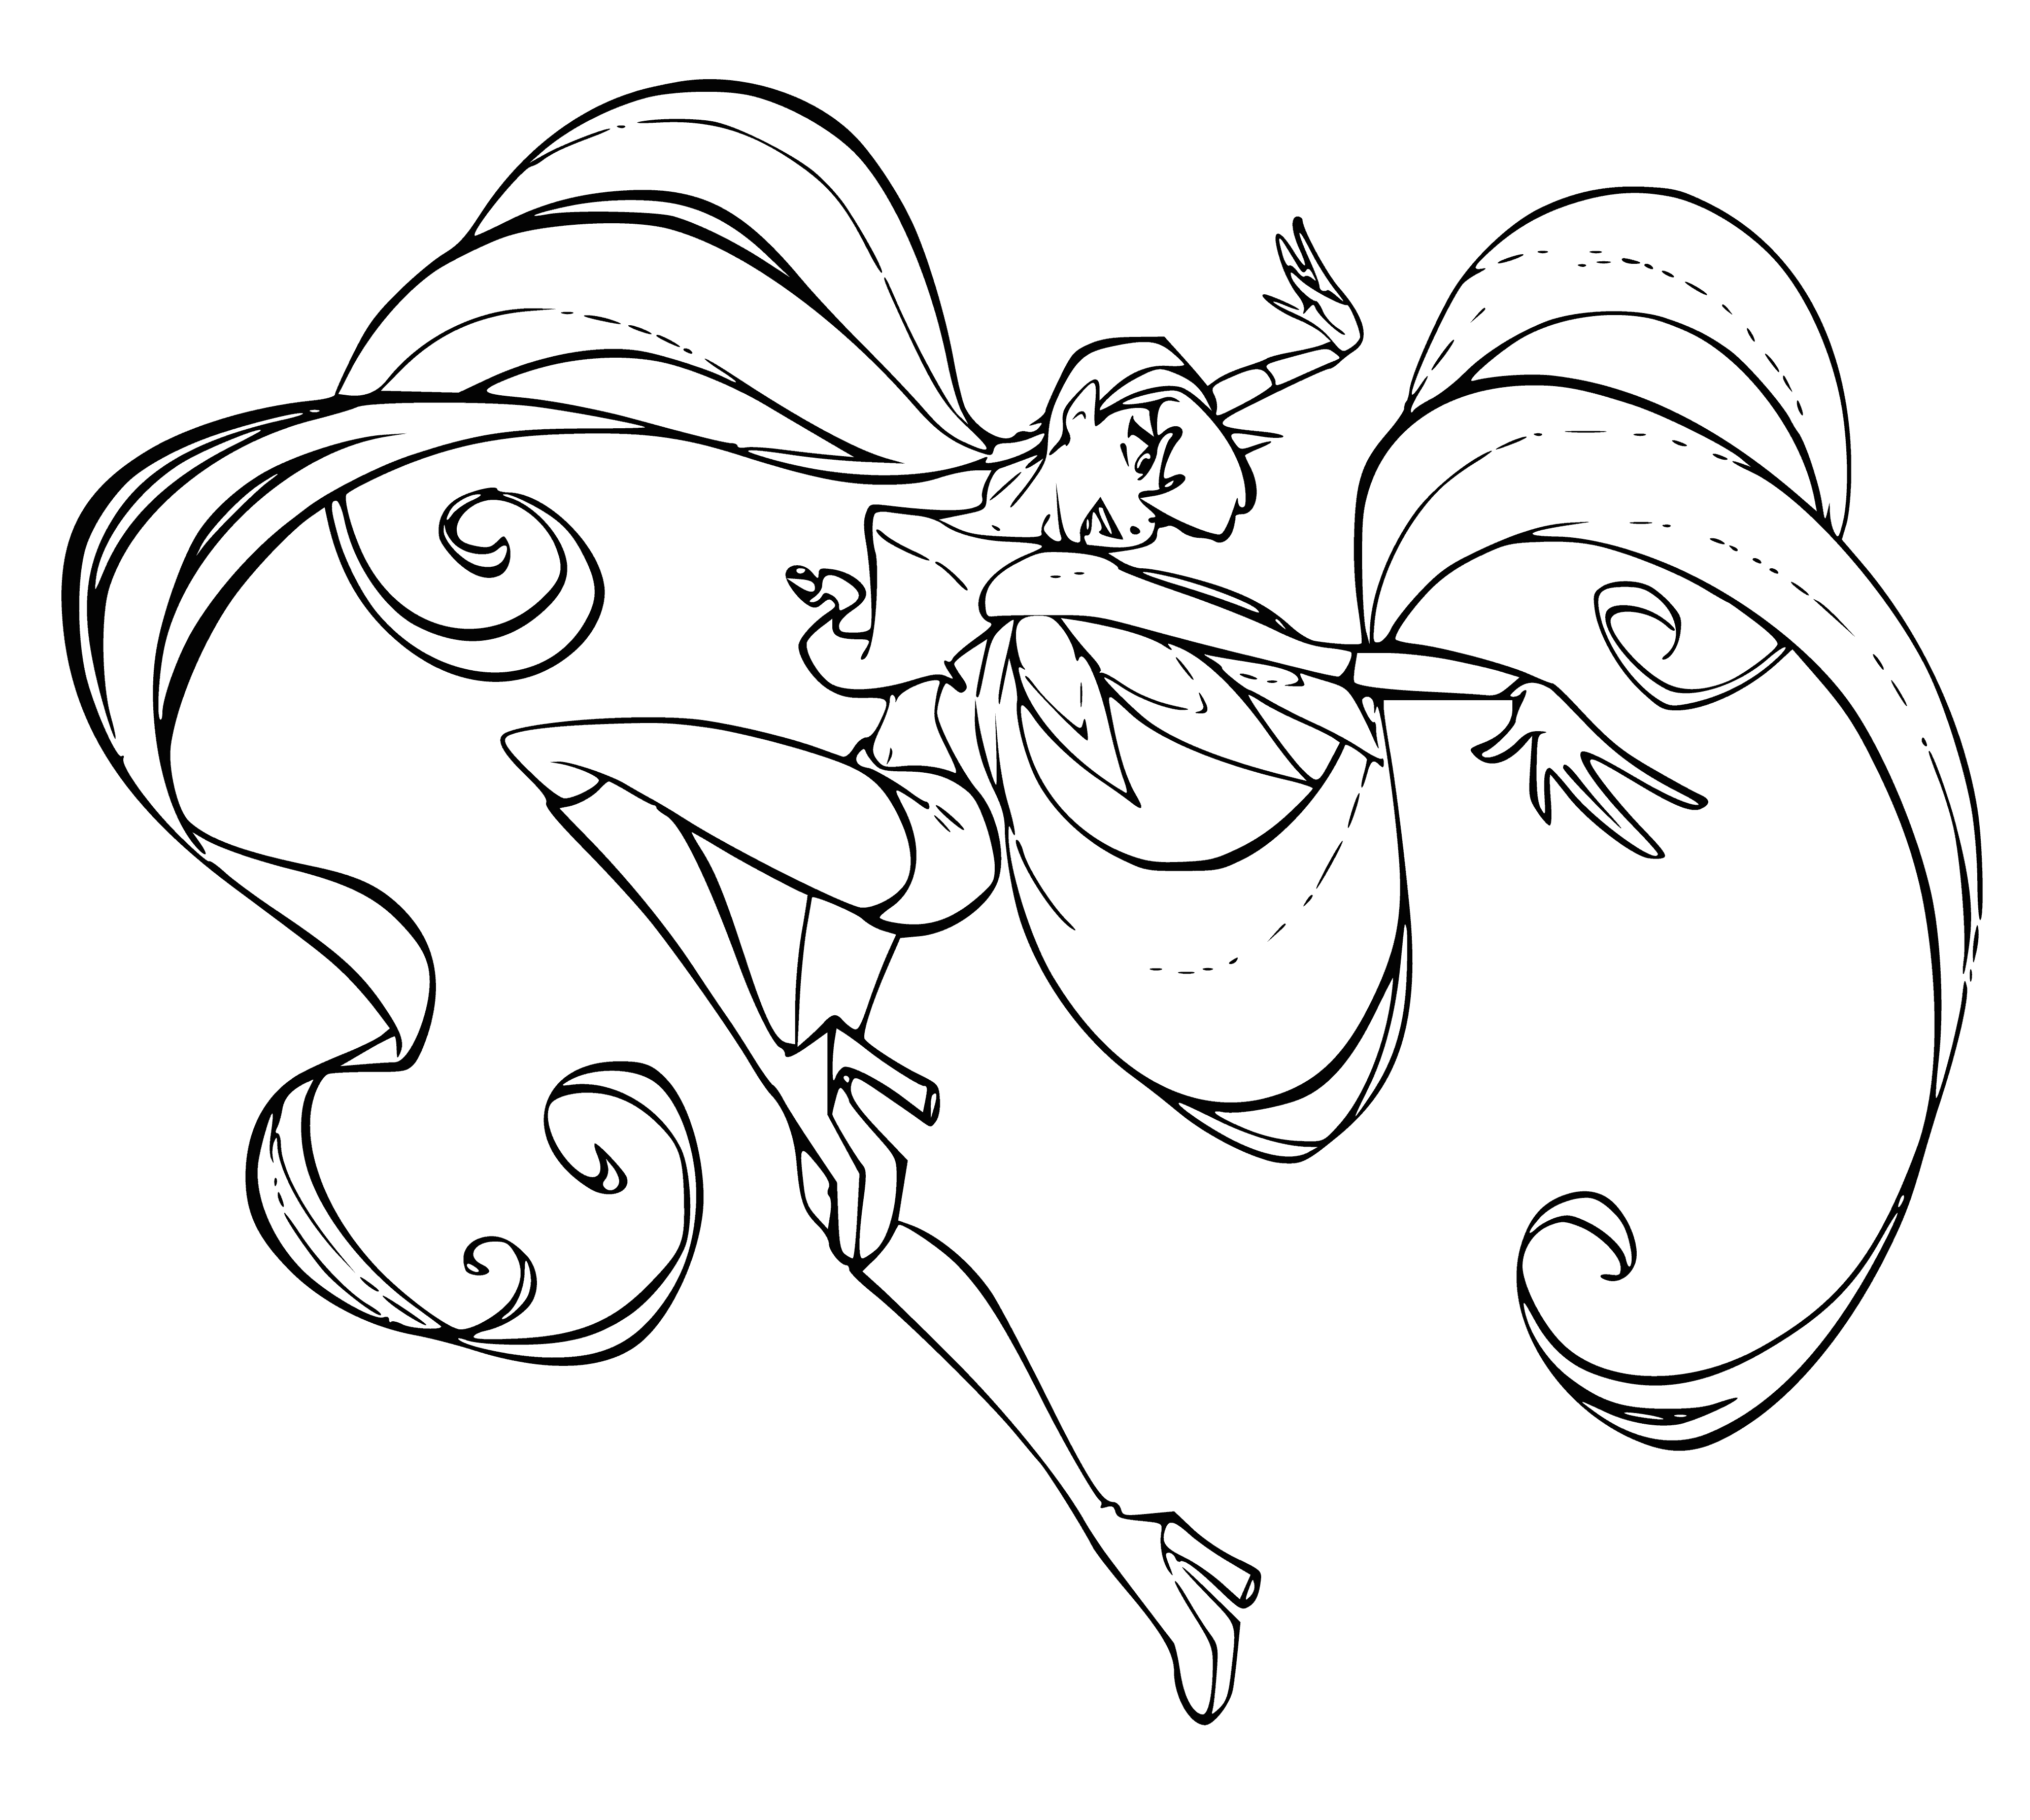 coloring page: Fairy Stella flies through the sky with blonde hair, blue eyes, a pink dress adorned with white flowers, and blue and white wings.